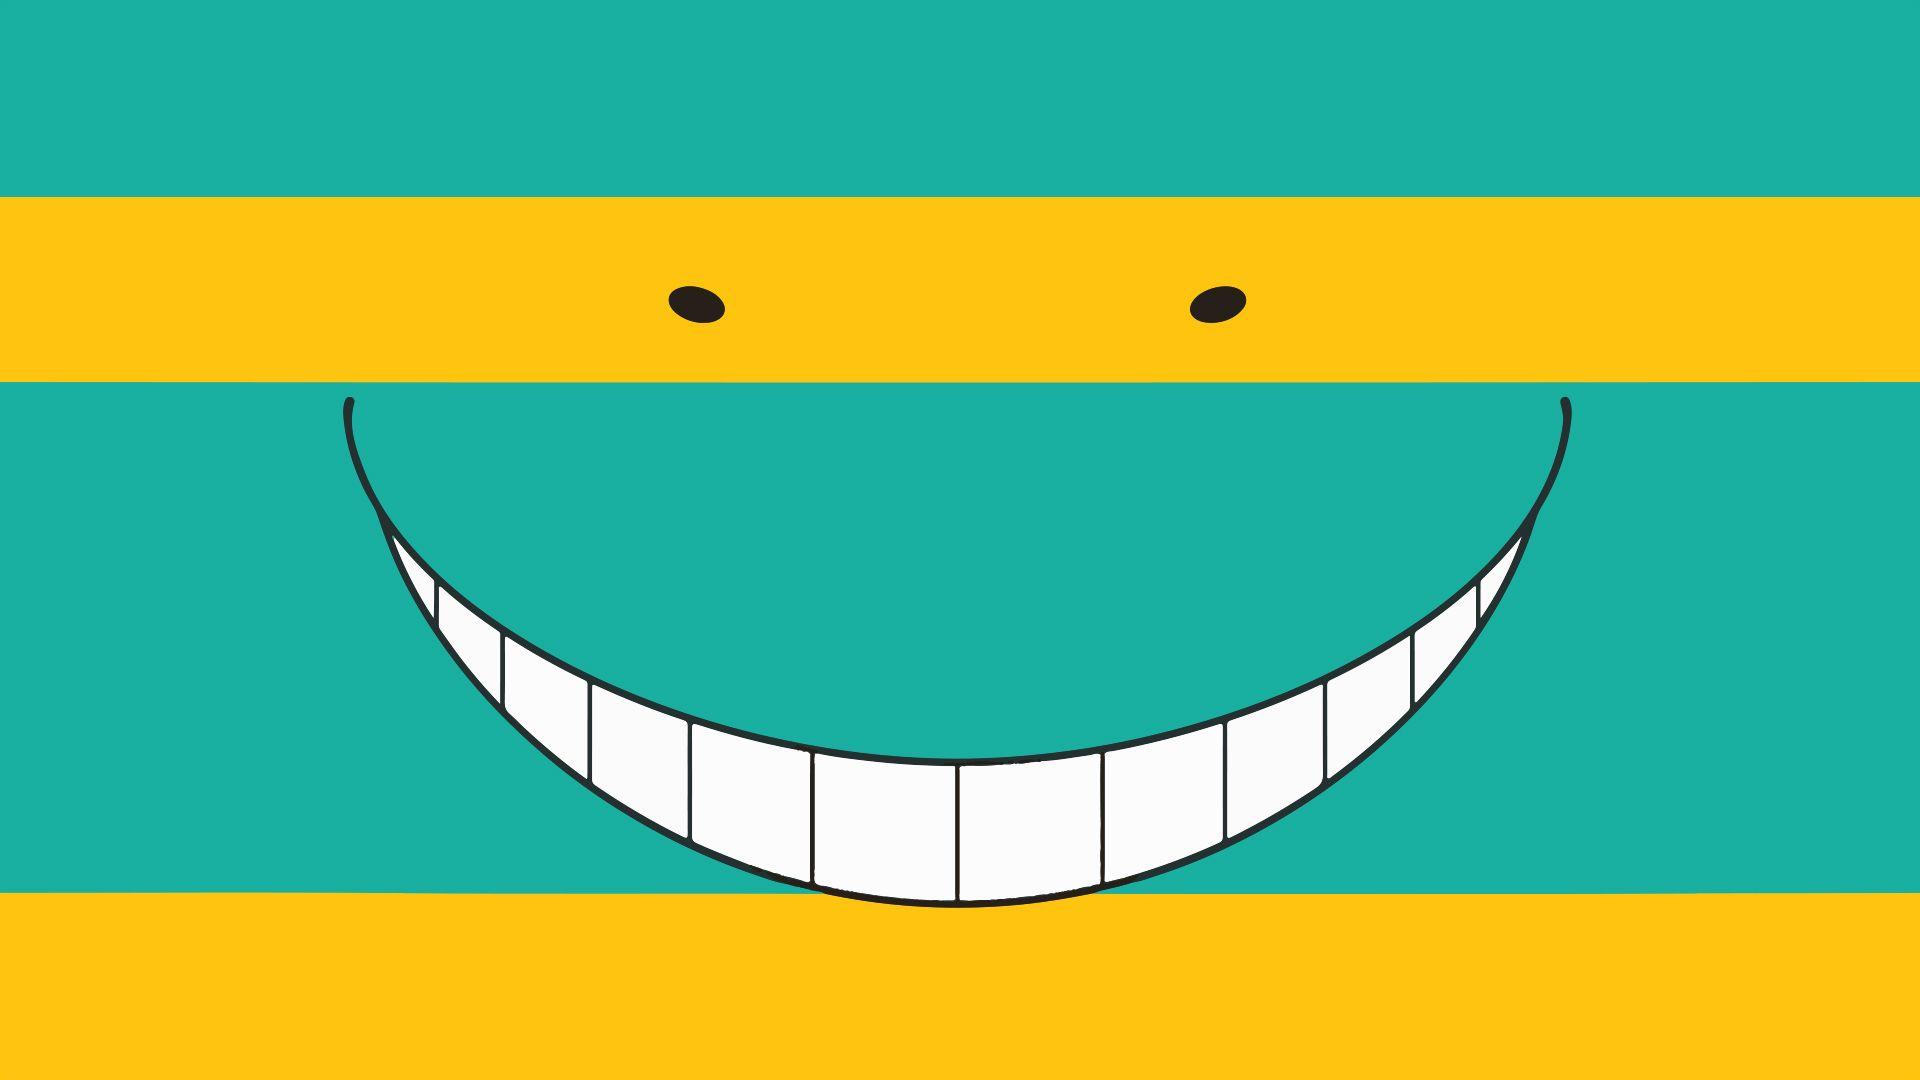 Assassination Classroom Full HD Wallpaper and Background